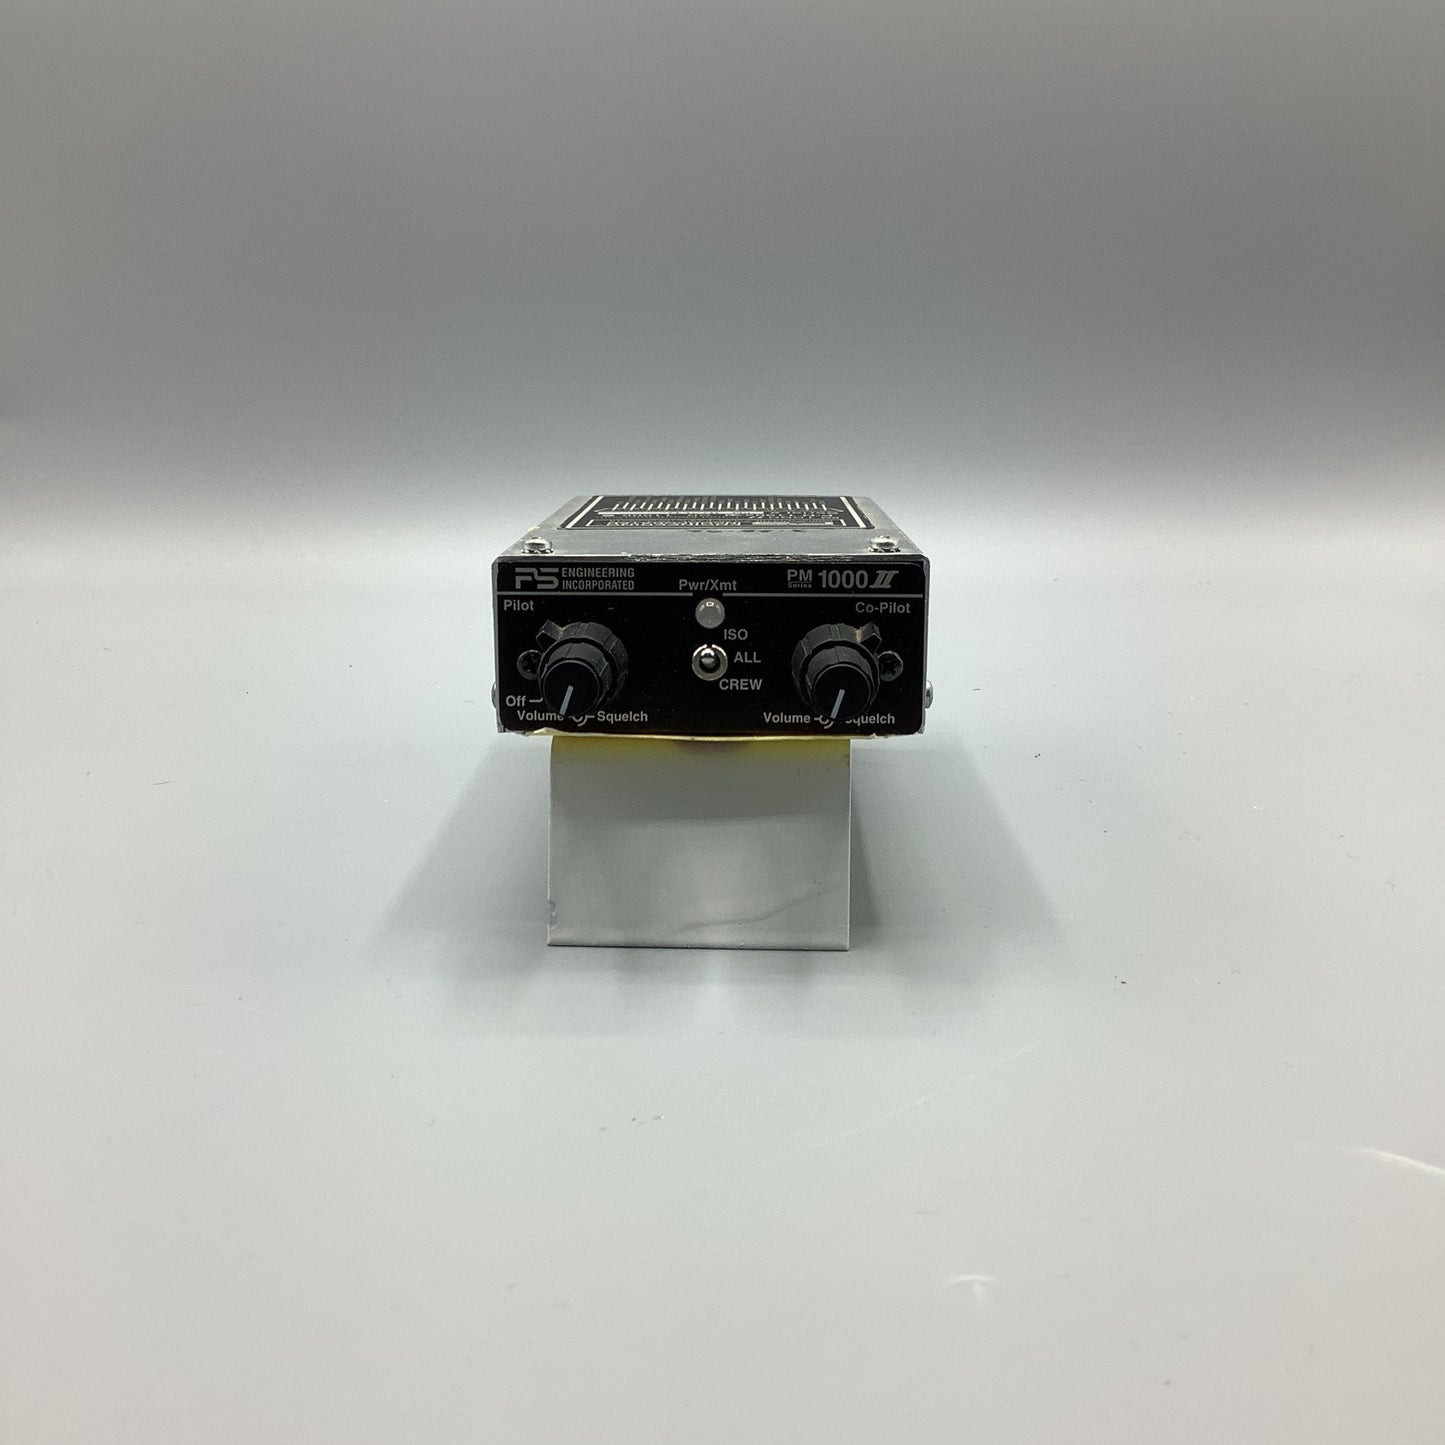 PS Engineering PM 1000 Intercom - Part Number: 11902